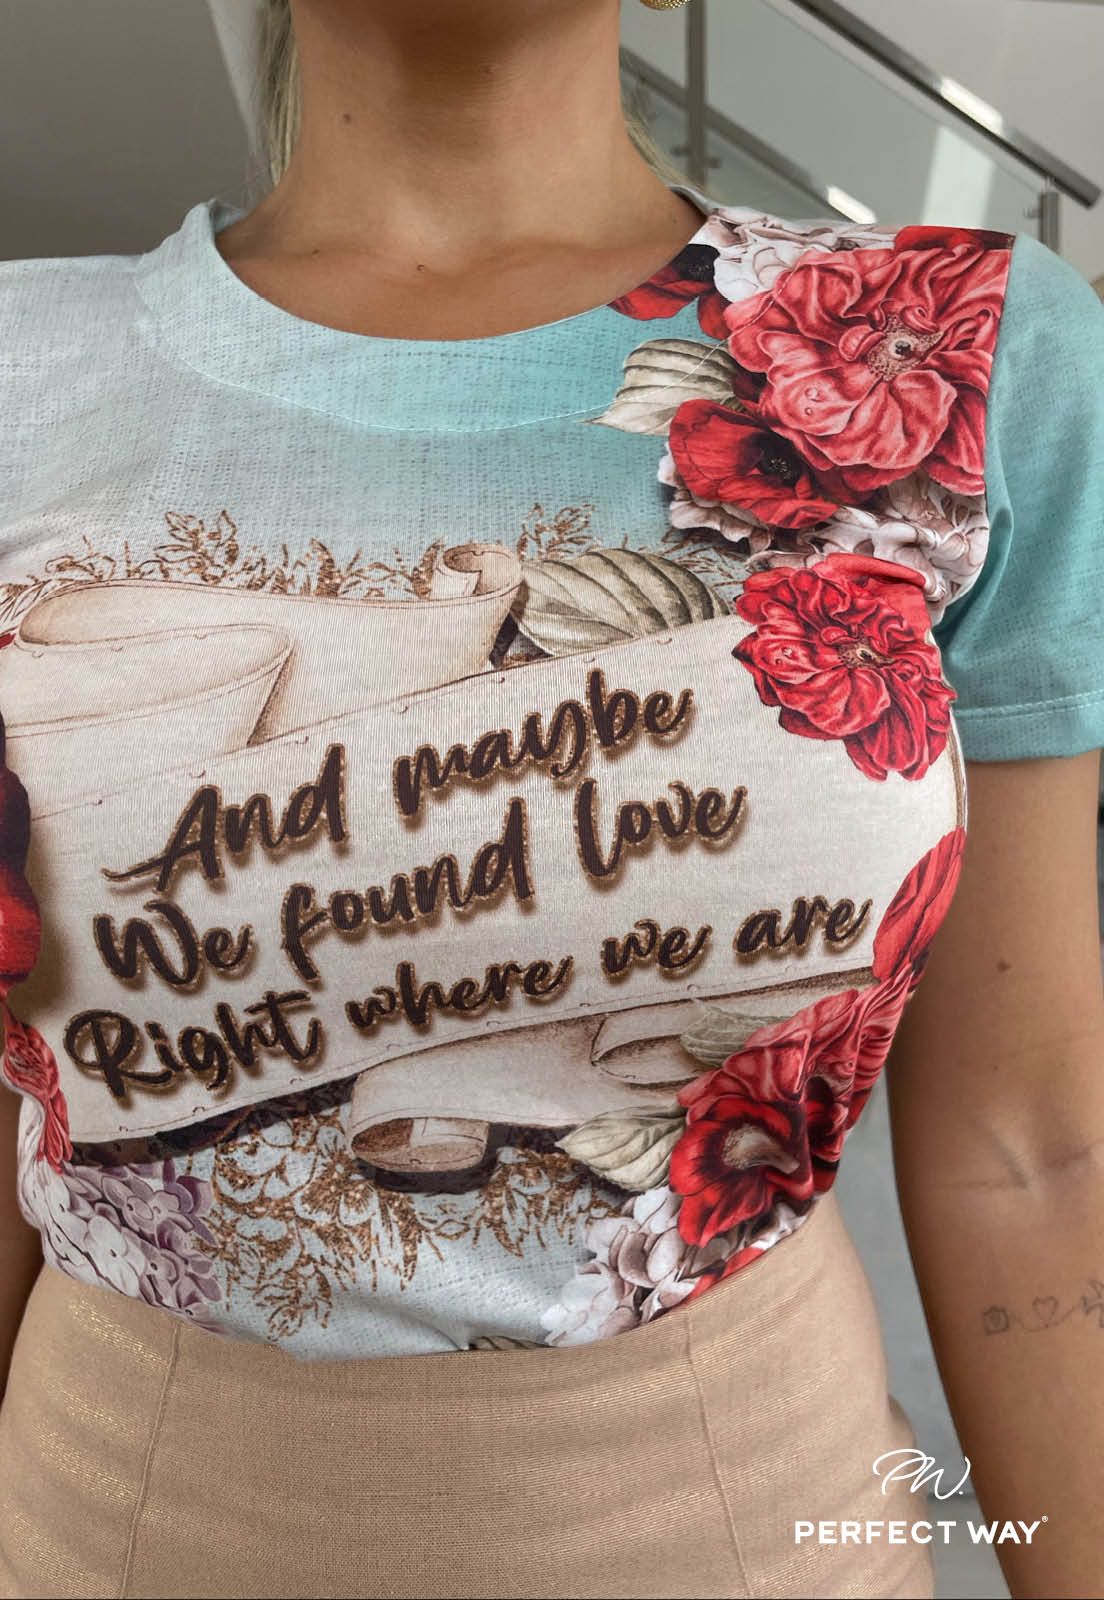 "And maybe we found Love..." T-Shirt